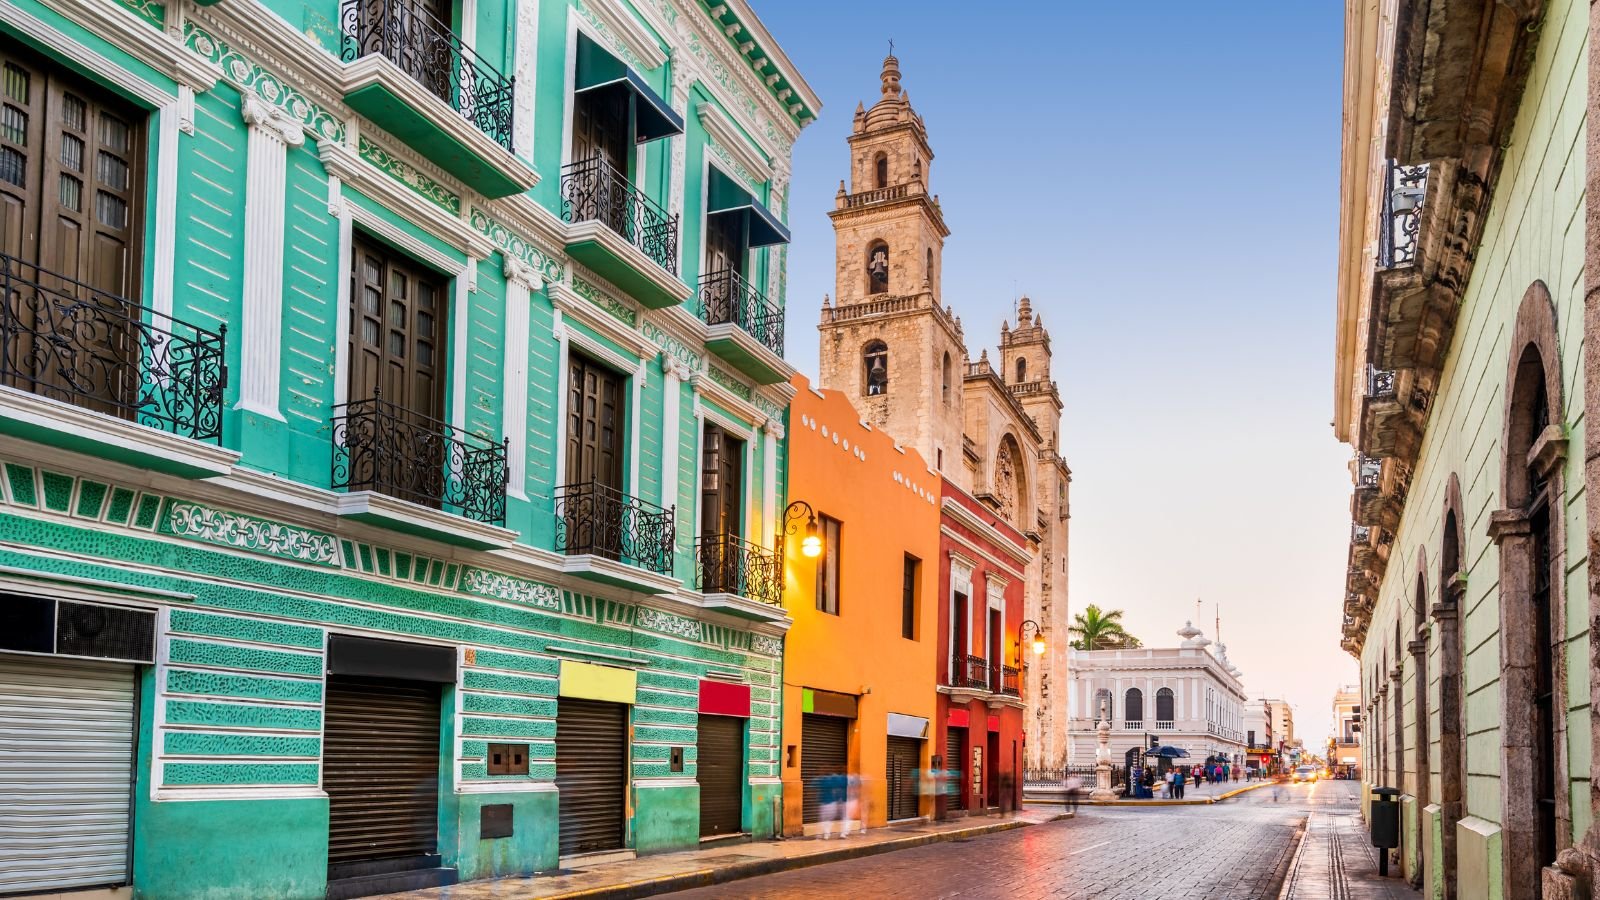 <p>Mexico offers some fantastic places that expats love for their vibrant culture, beautiful scenery, cost of living, as well as welcoming communities. There is space for everyone, whether they want to live in a busy metropolis or a seaside area.</p>